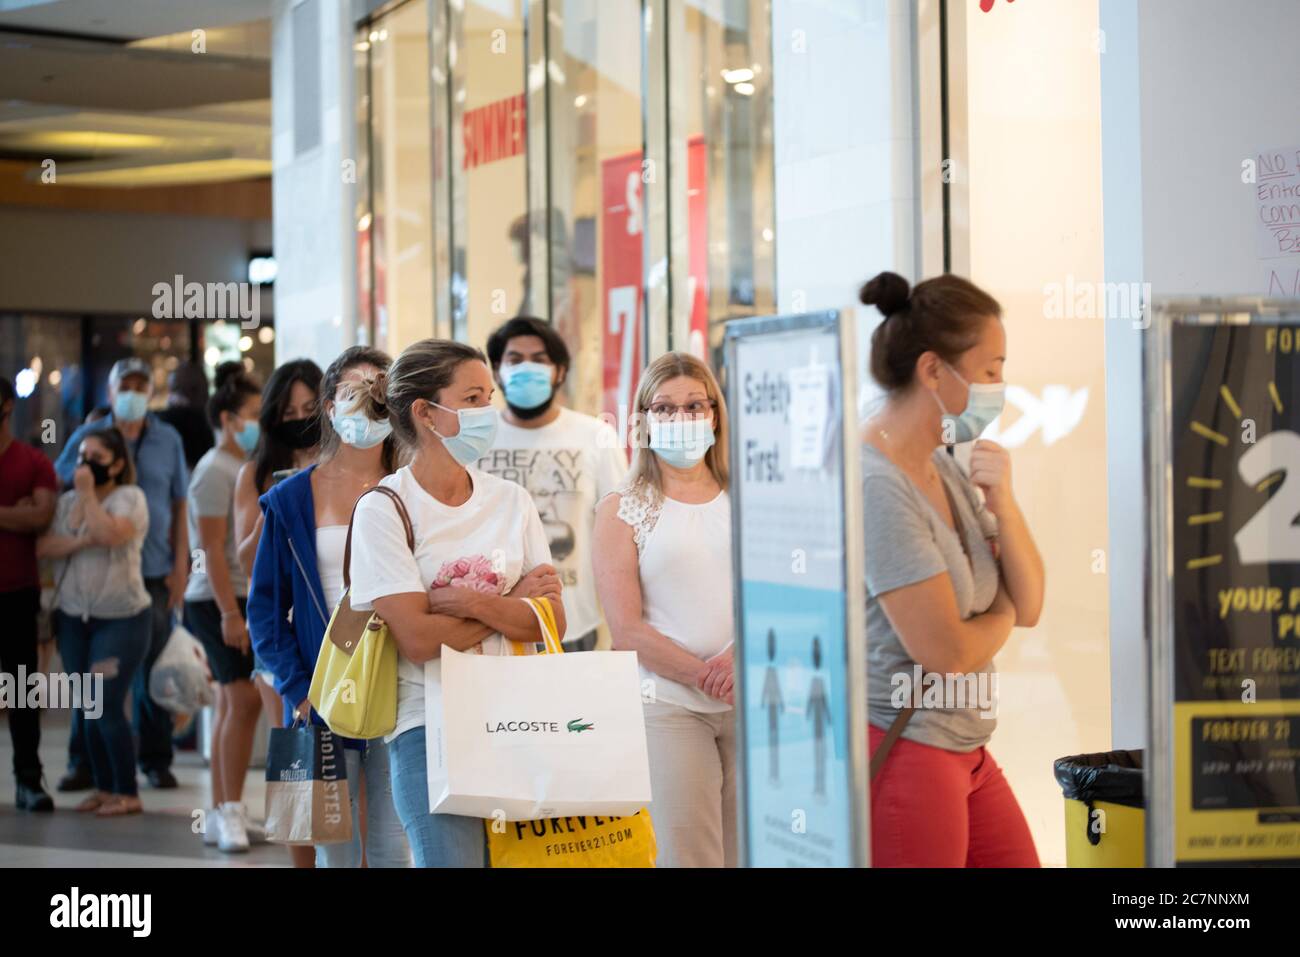 Sunrise, Florida, USA. 18th July, 2020. Shoppers line up to get into a store at Sawgrass Mills Mall in Florida despite record high number of new Covid-19 cases in the state this week Credit: Orit Ben-Ezzer/ZUMA Wire/Alamy Live News Stock Photo